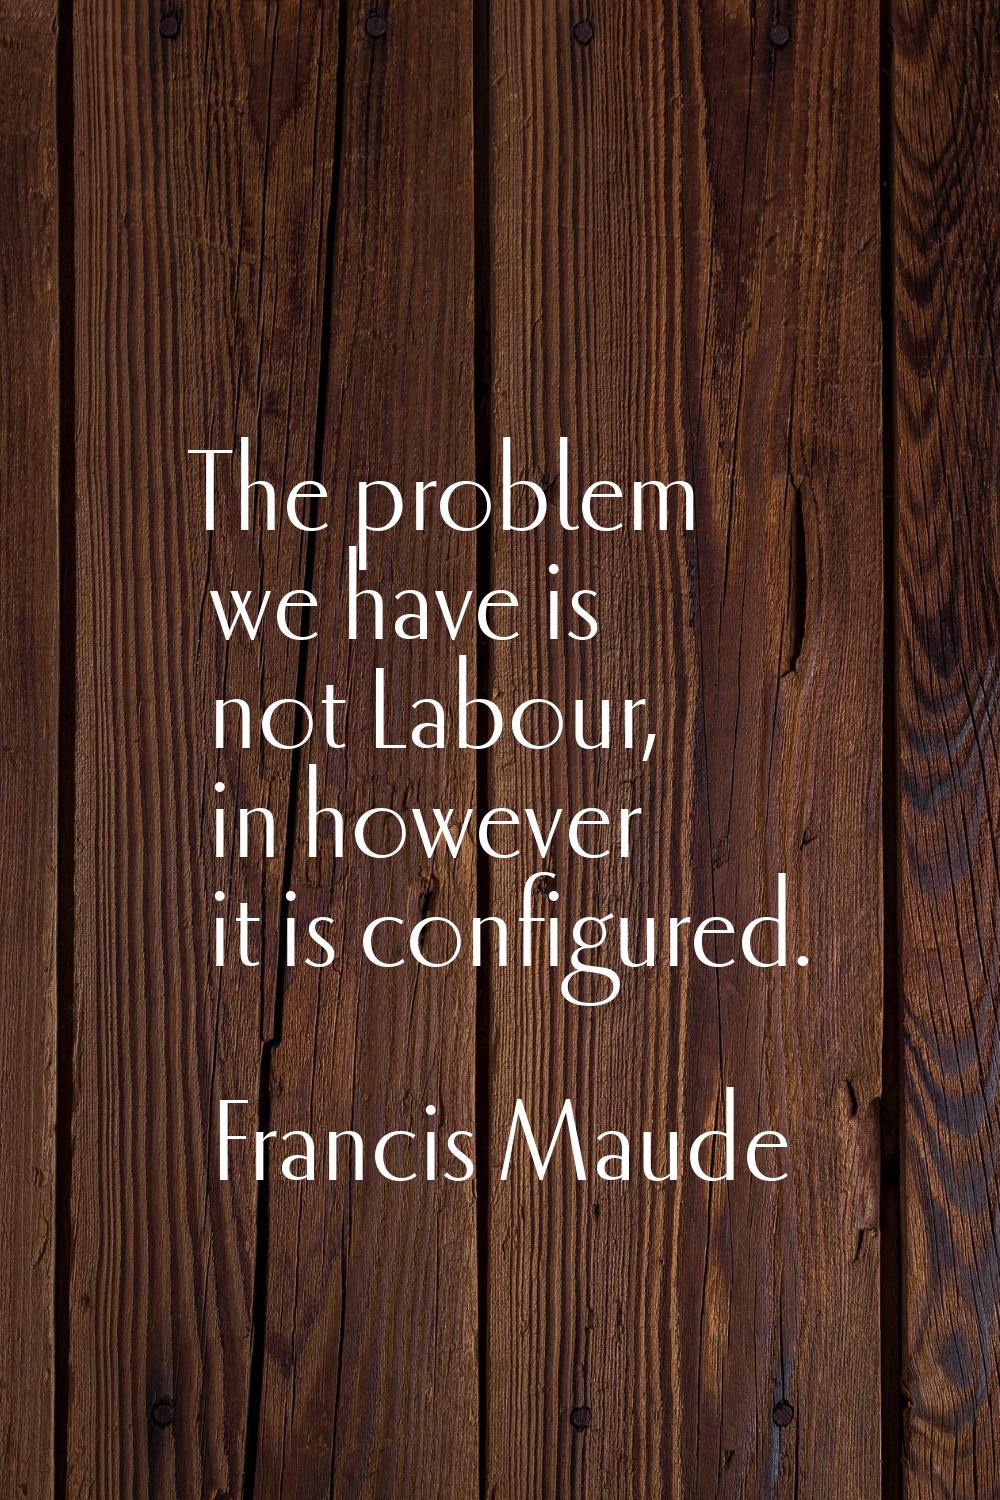 The problem we have is not Labour, in however it is configured.